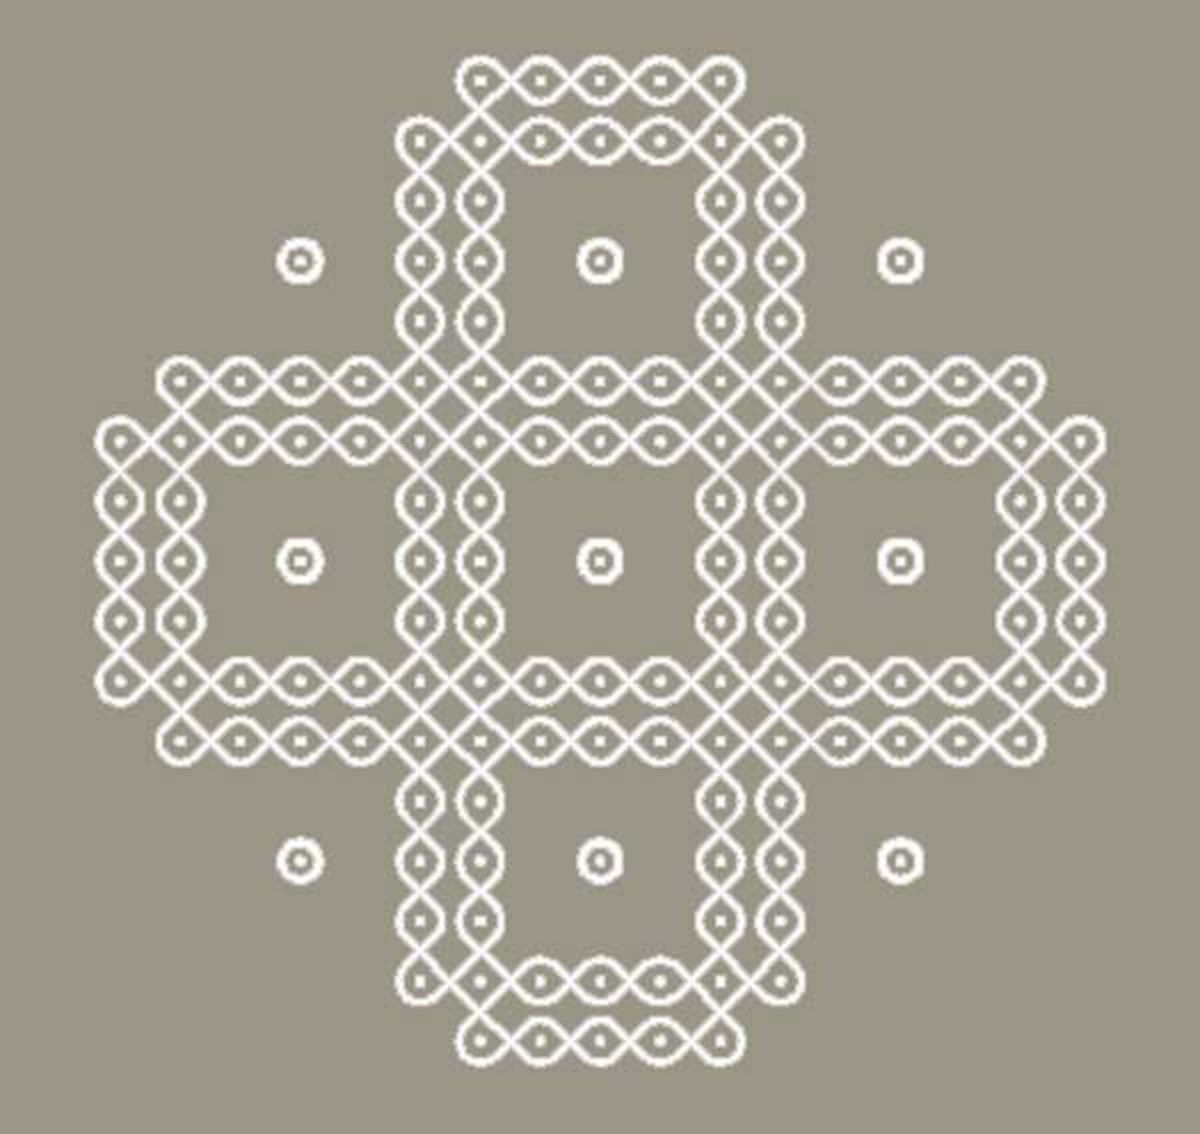 A Kolam pattern that was drawn with curved lines around guiding dots.